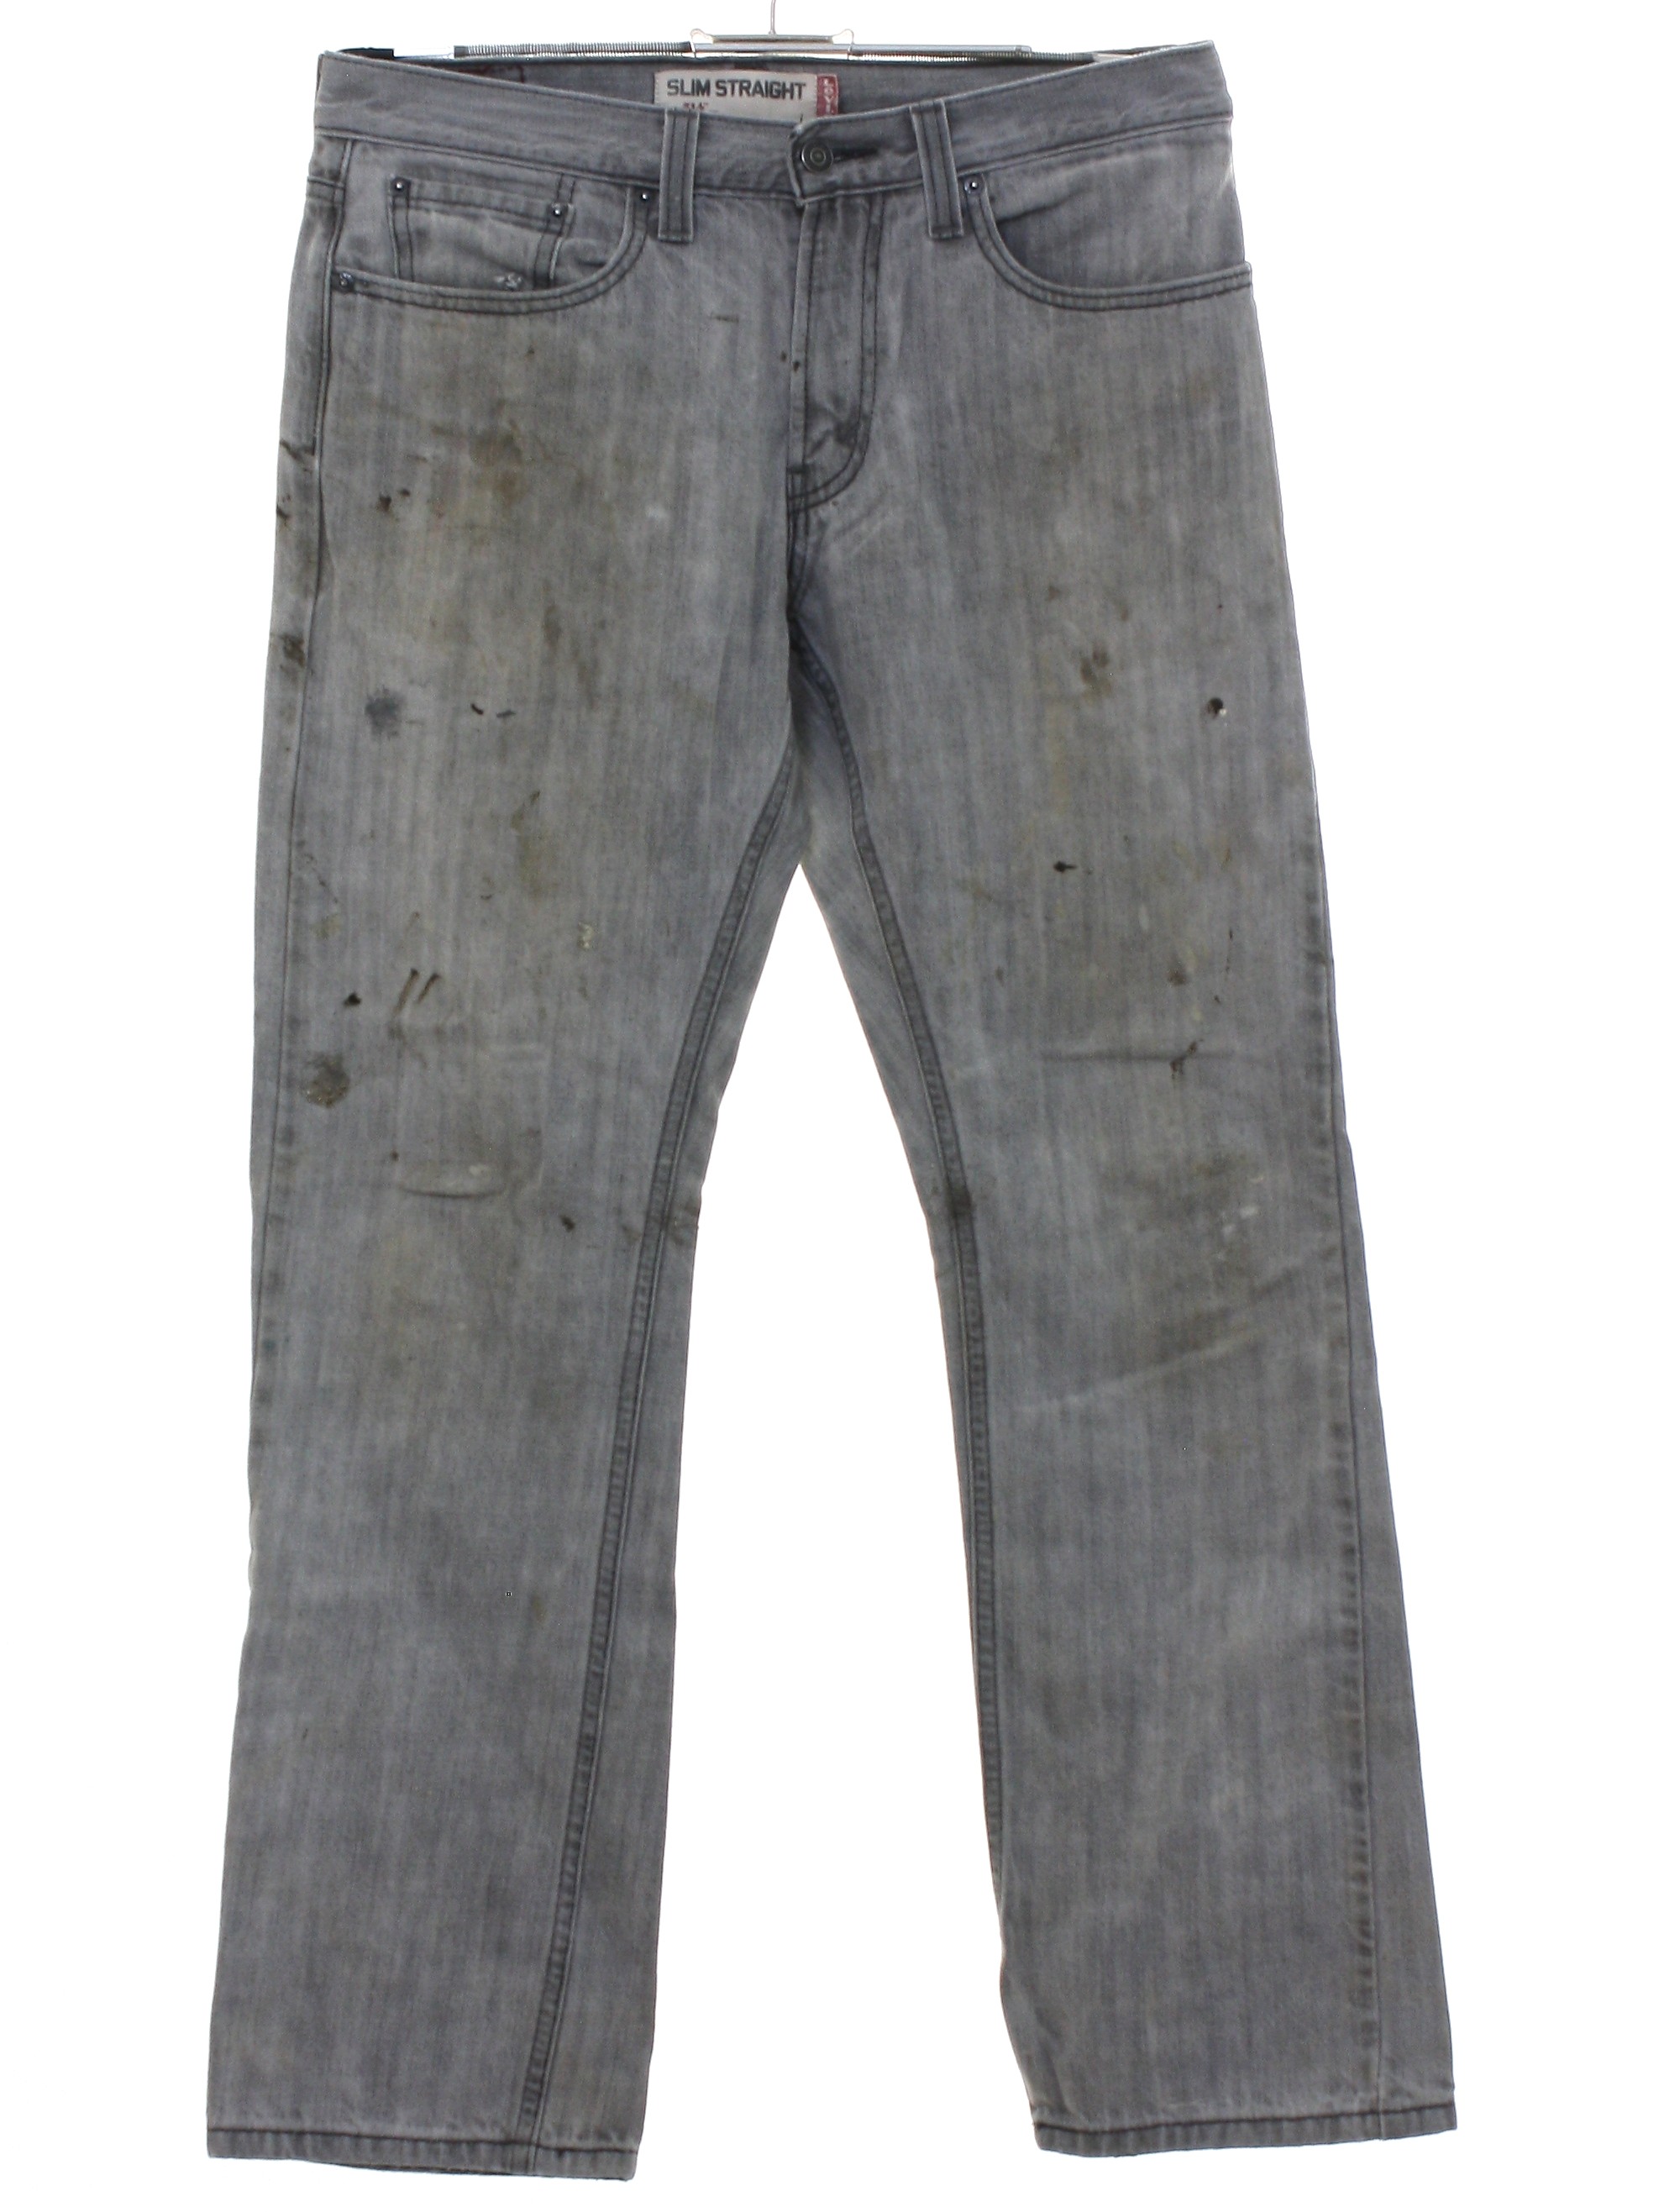 Pants: 90s -Levis 514- Mens grey grunge cotton denim levis 514 slim fit  straight leg denim jeans pants with zipper fly closure with button. Five  pocket style - front scoop pockets with